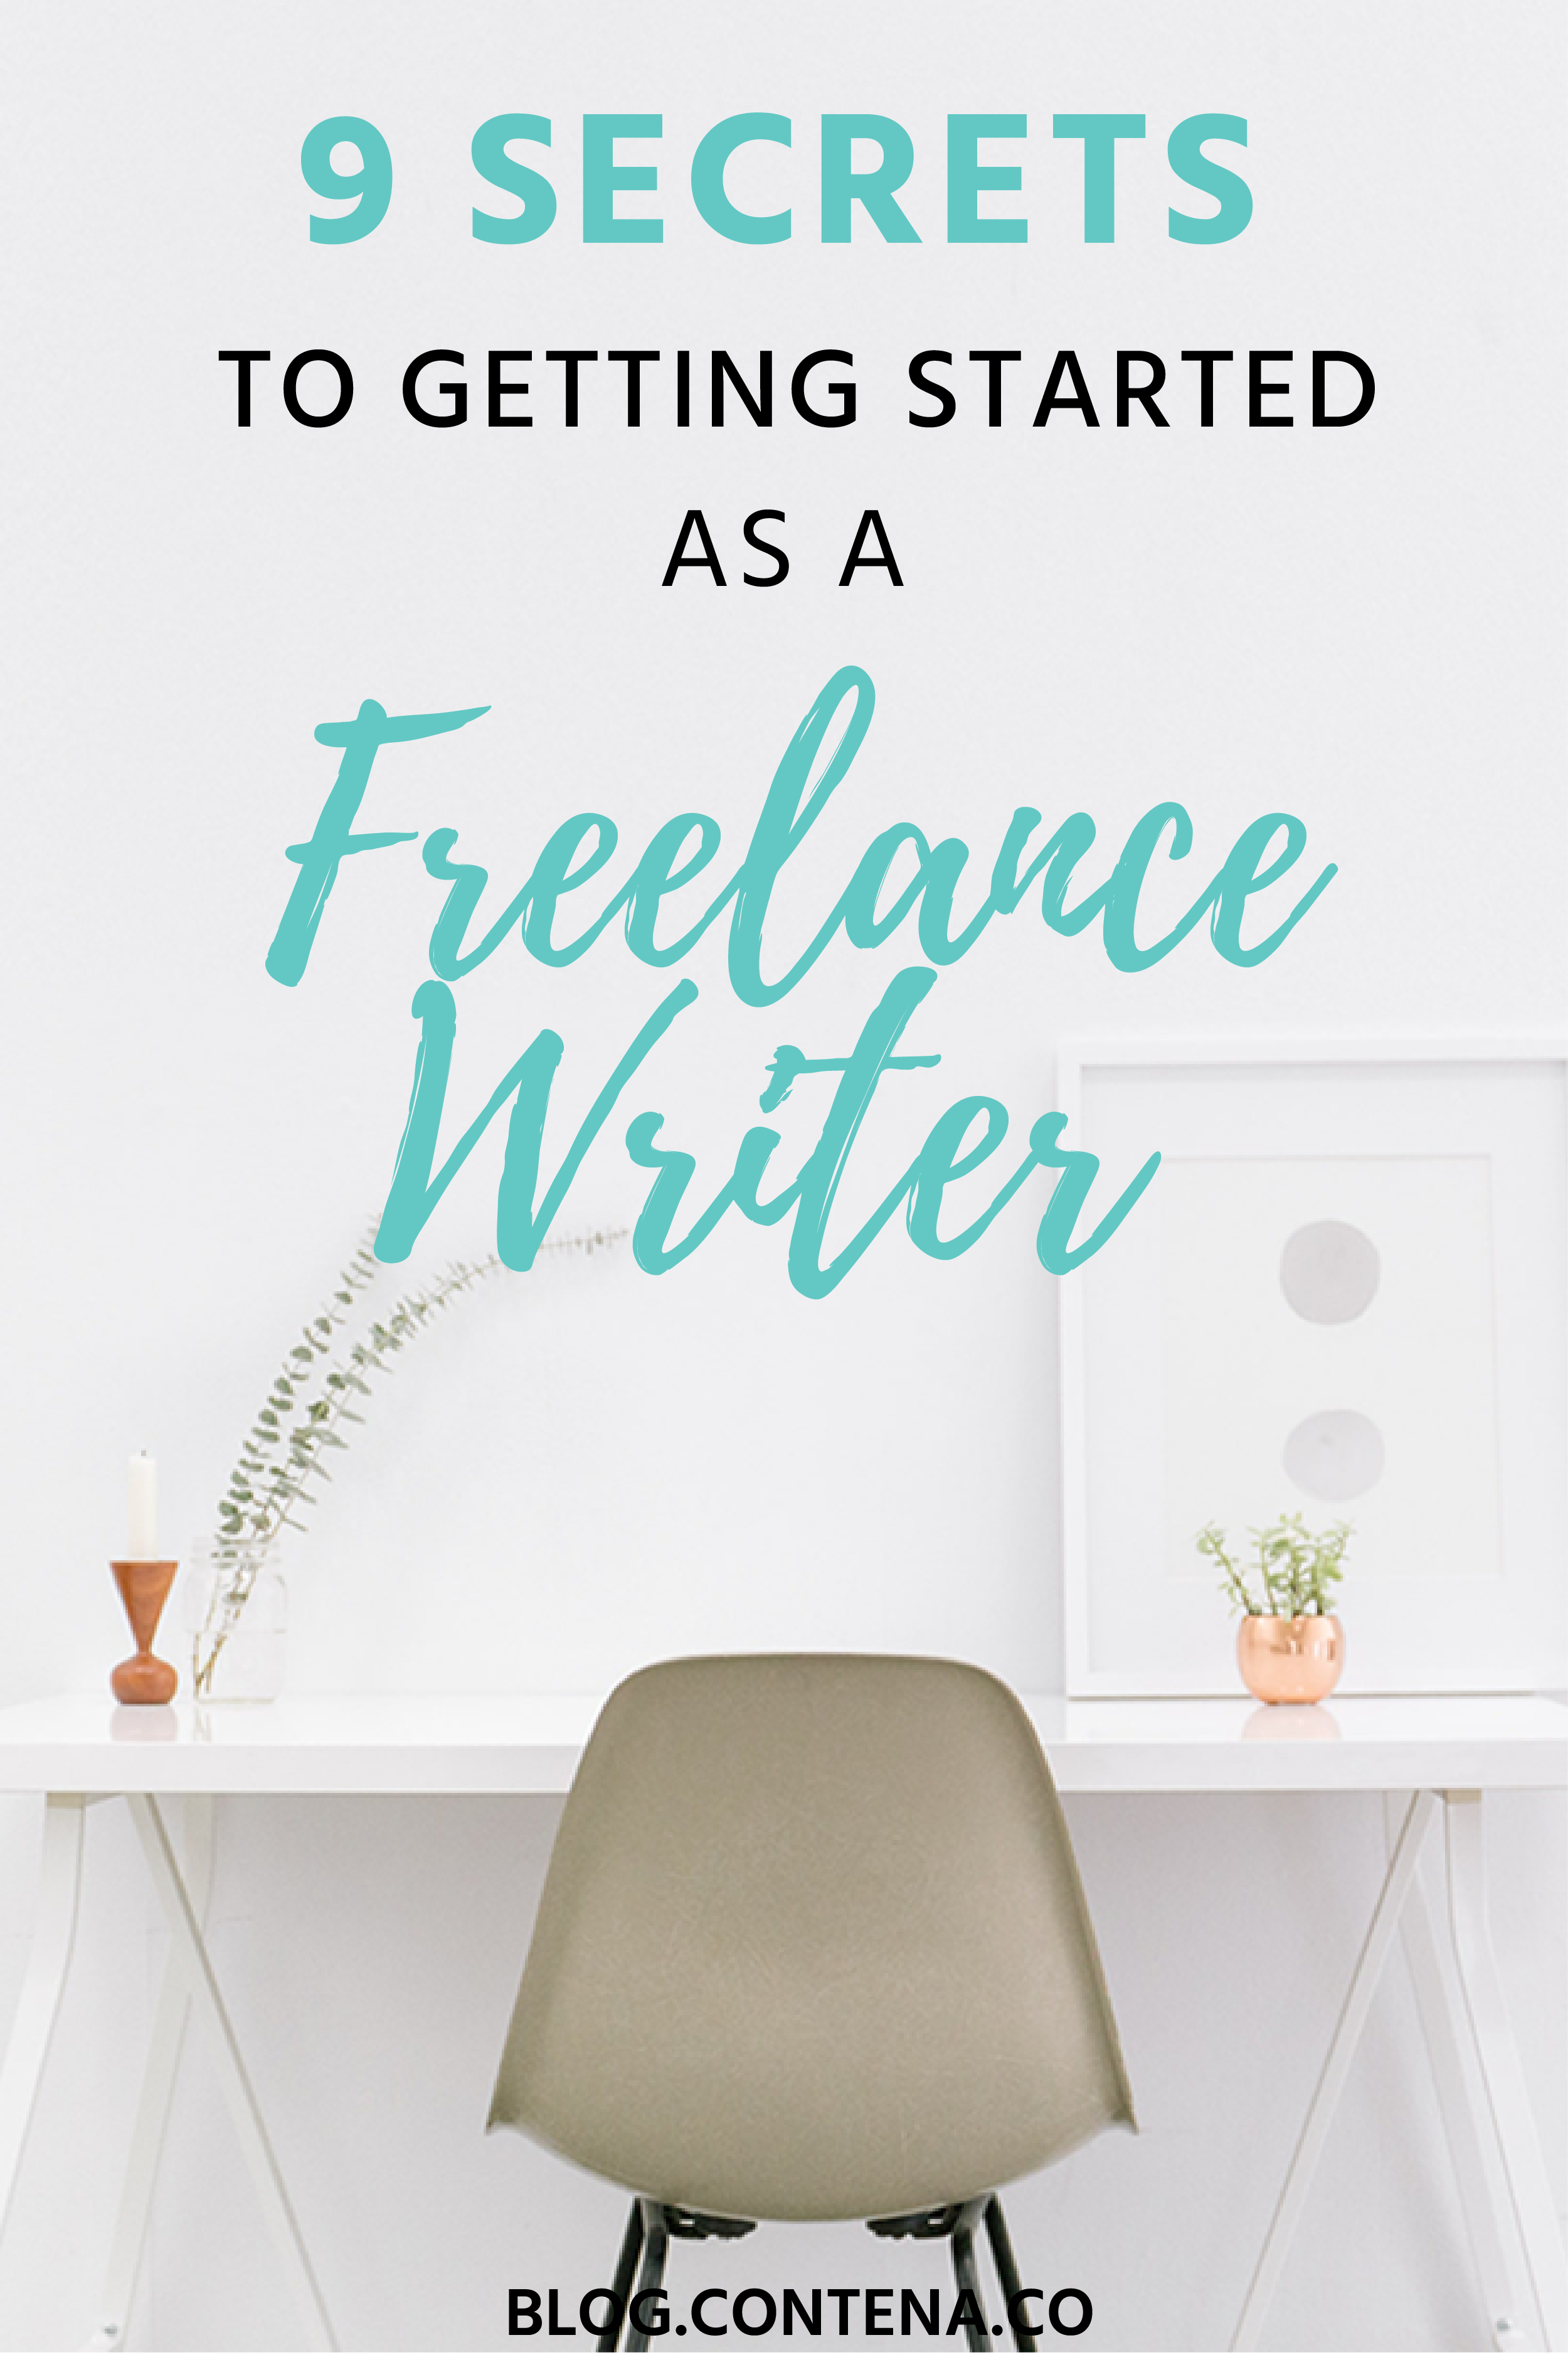 If you’re wondering how to start freelance writing and work from home, we have the tips and advice for you. Here’s how to get started with your business as a freelance writer and find paid freelance writing jobs. #FreelanceWriting #OnlineBusiness #Freelancing #WorkFromHome #RemoteWork #Money #FreelanceWriter #WritingJobs